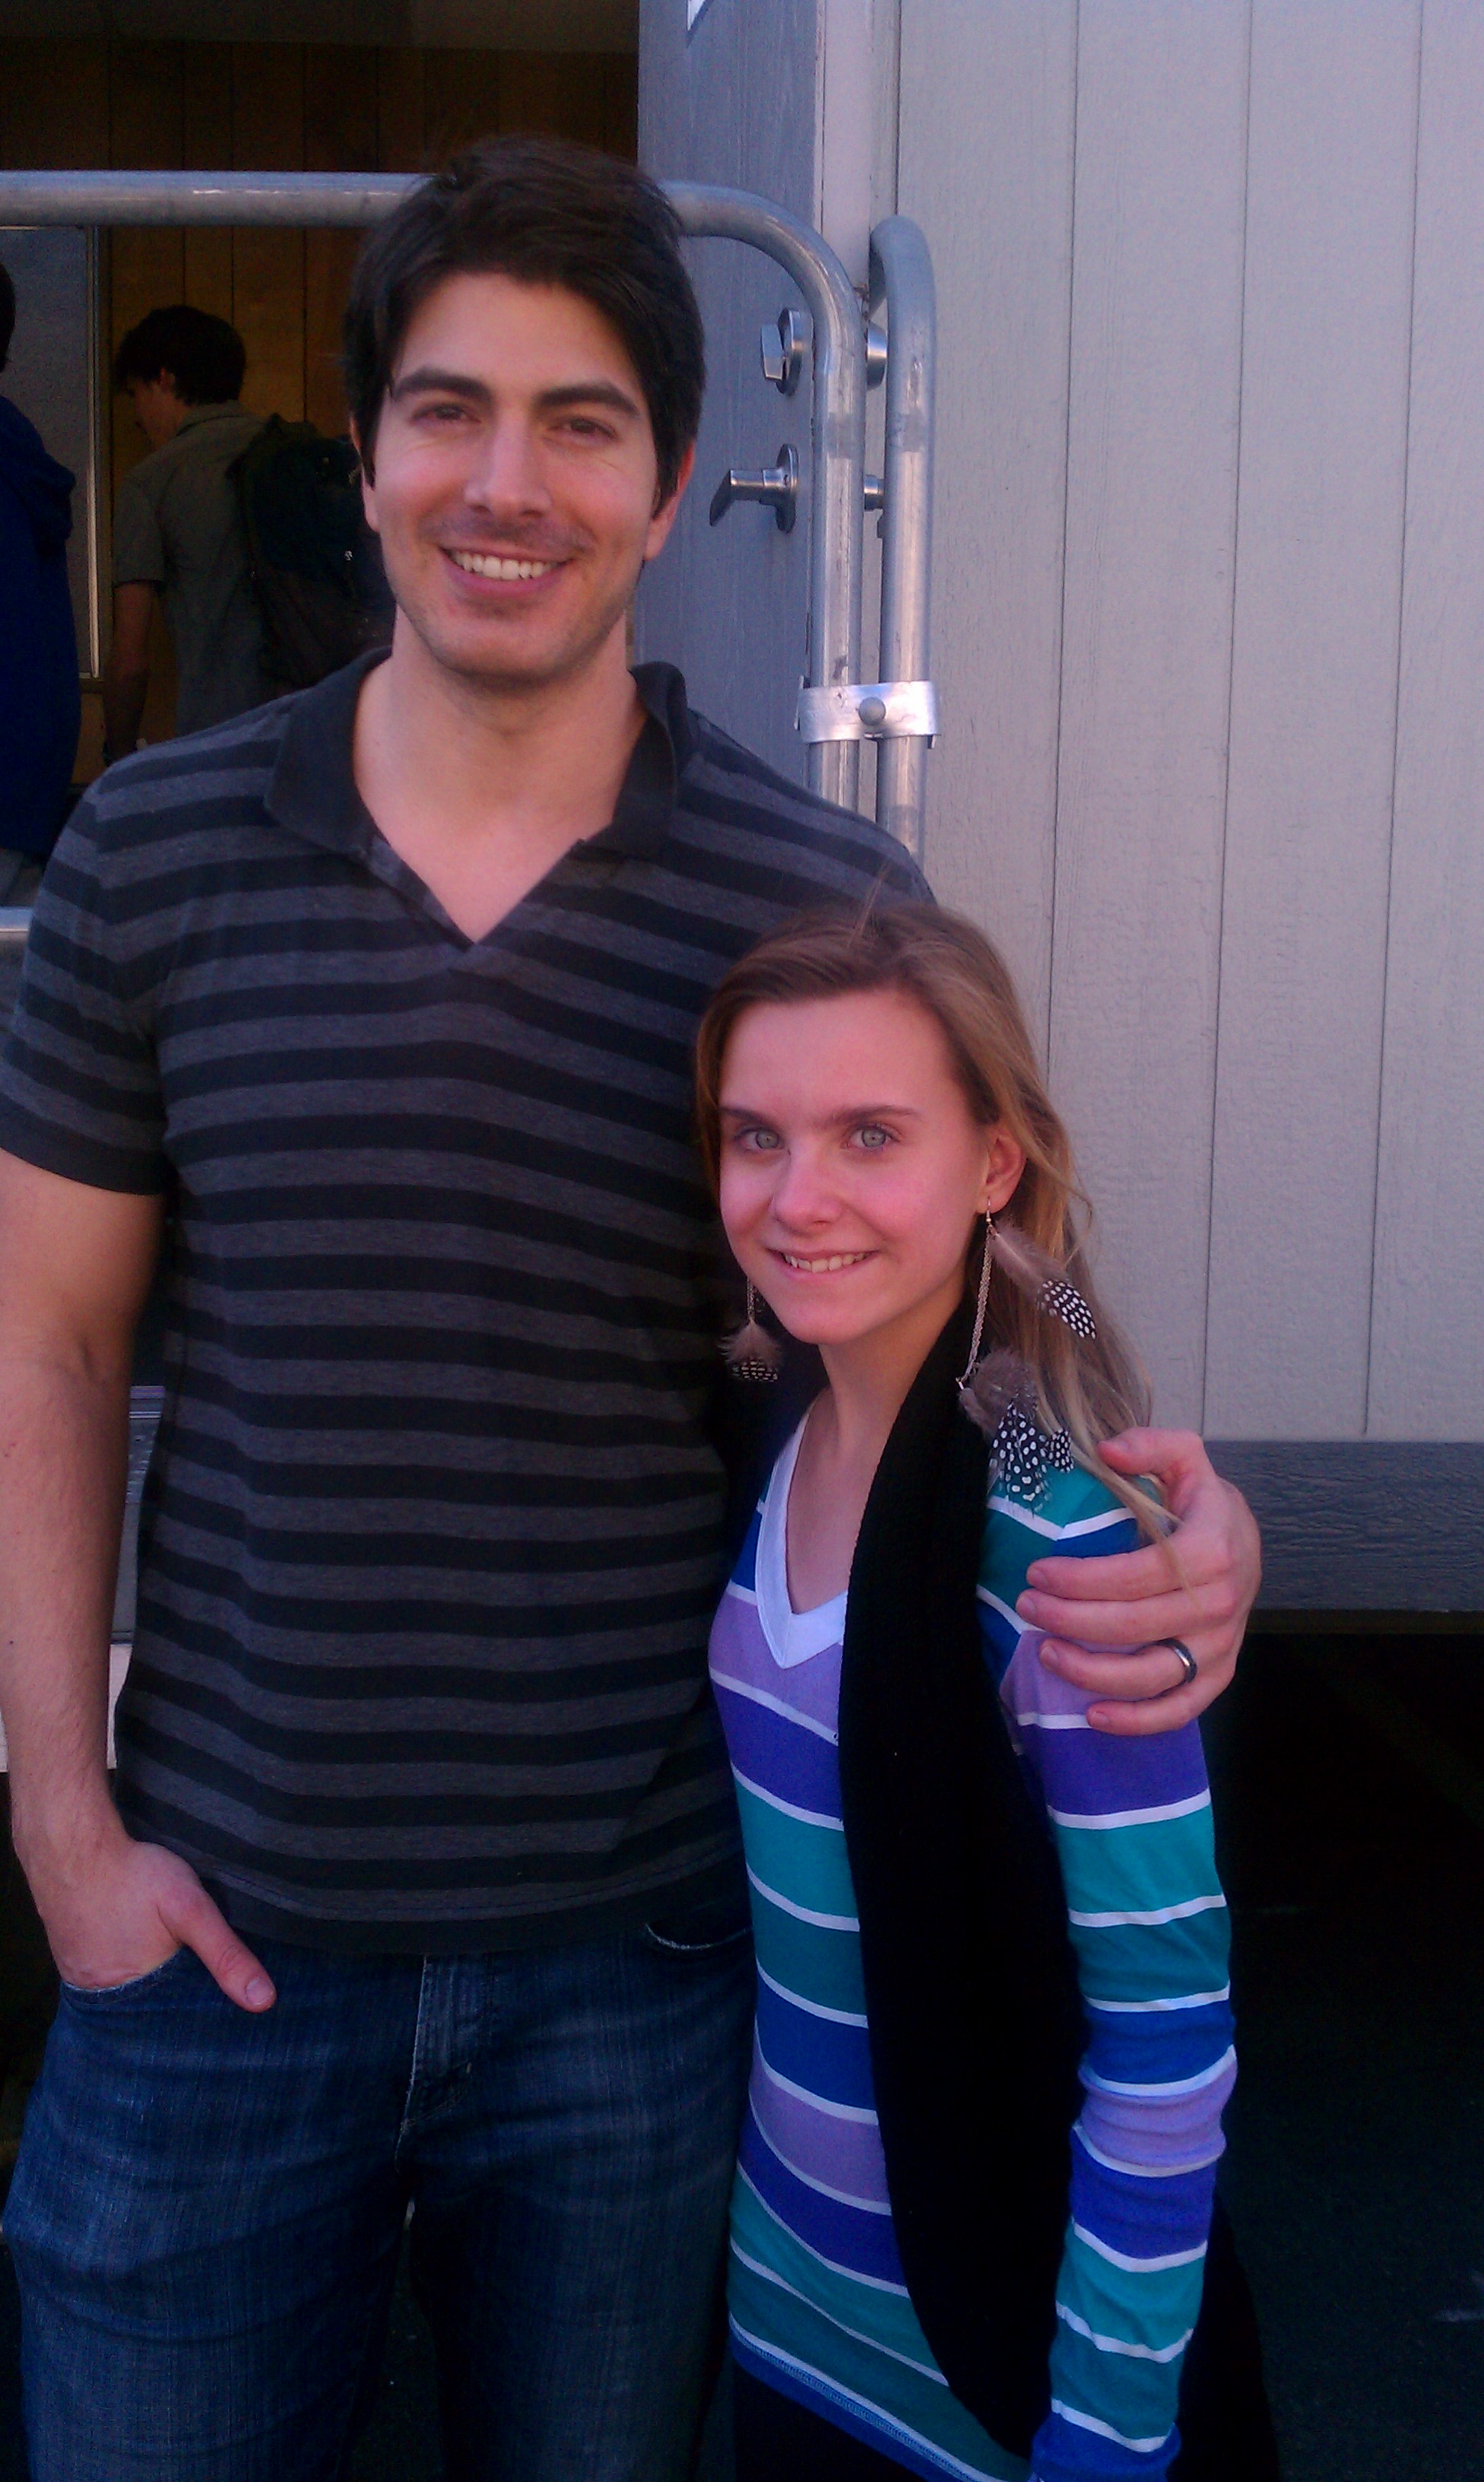 Sierra Willis and Brandon Routh working on set of PARTNERS